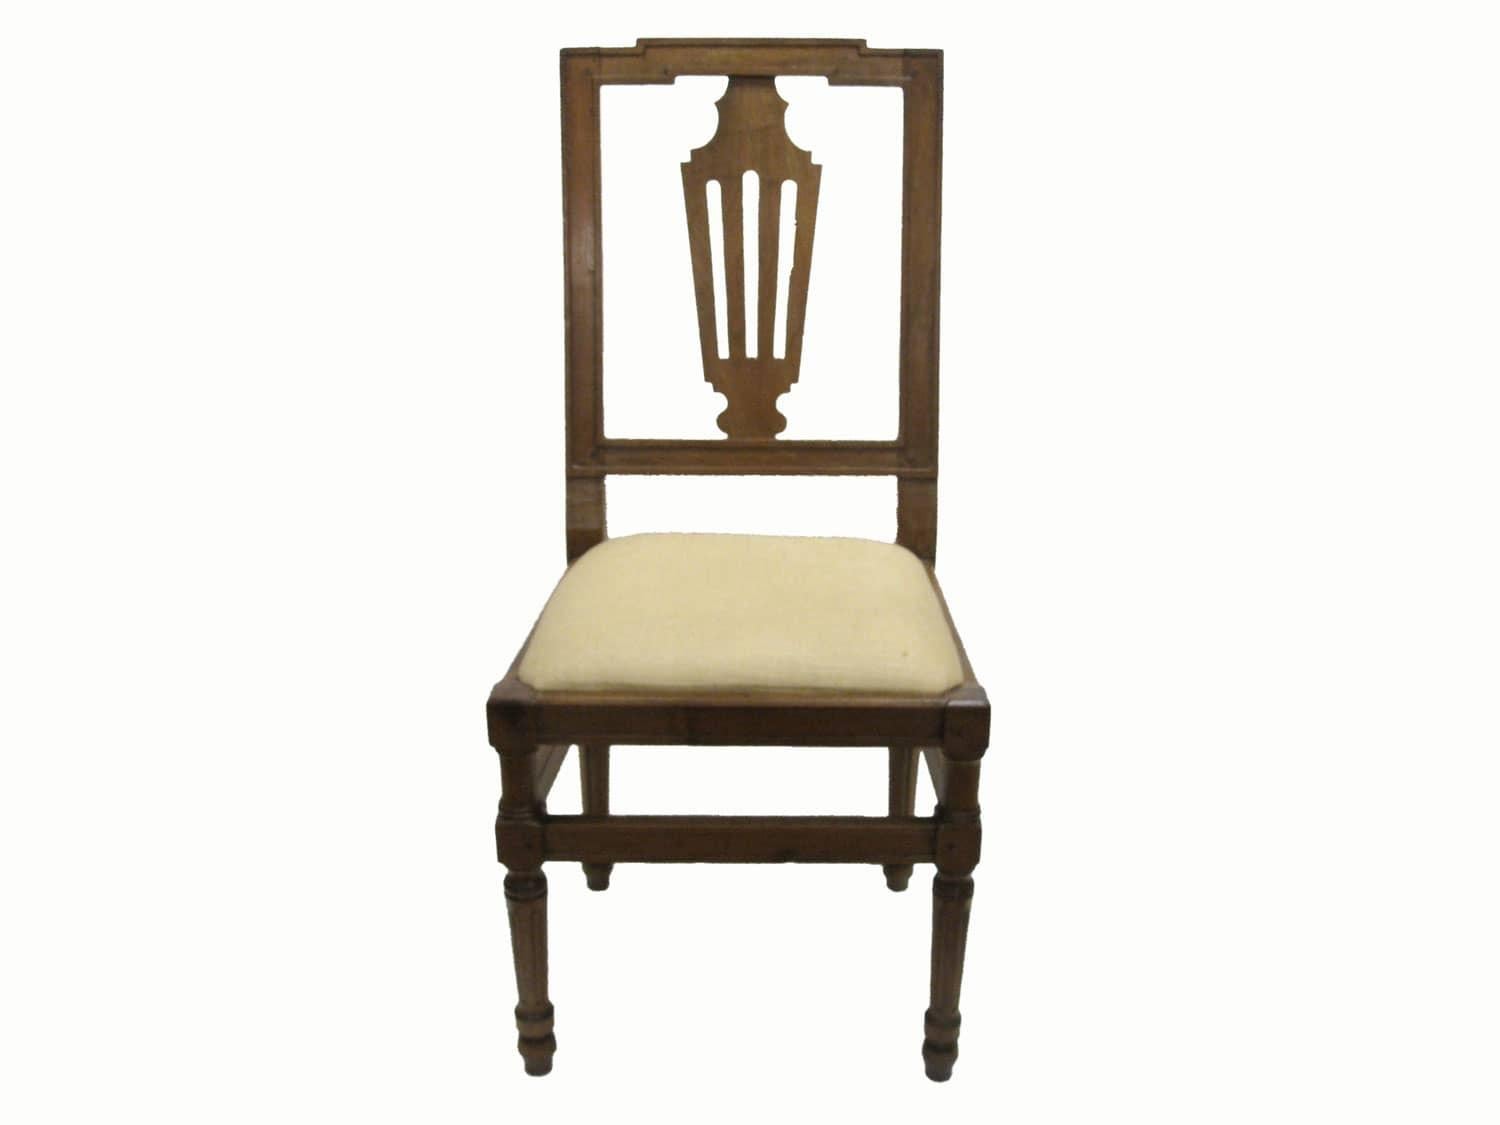 Turned Set of Four Italian Chairs Late 19th Century Piedmontese Solid Walnut Chairs  For Sale